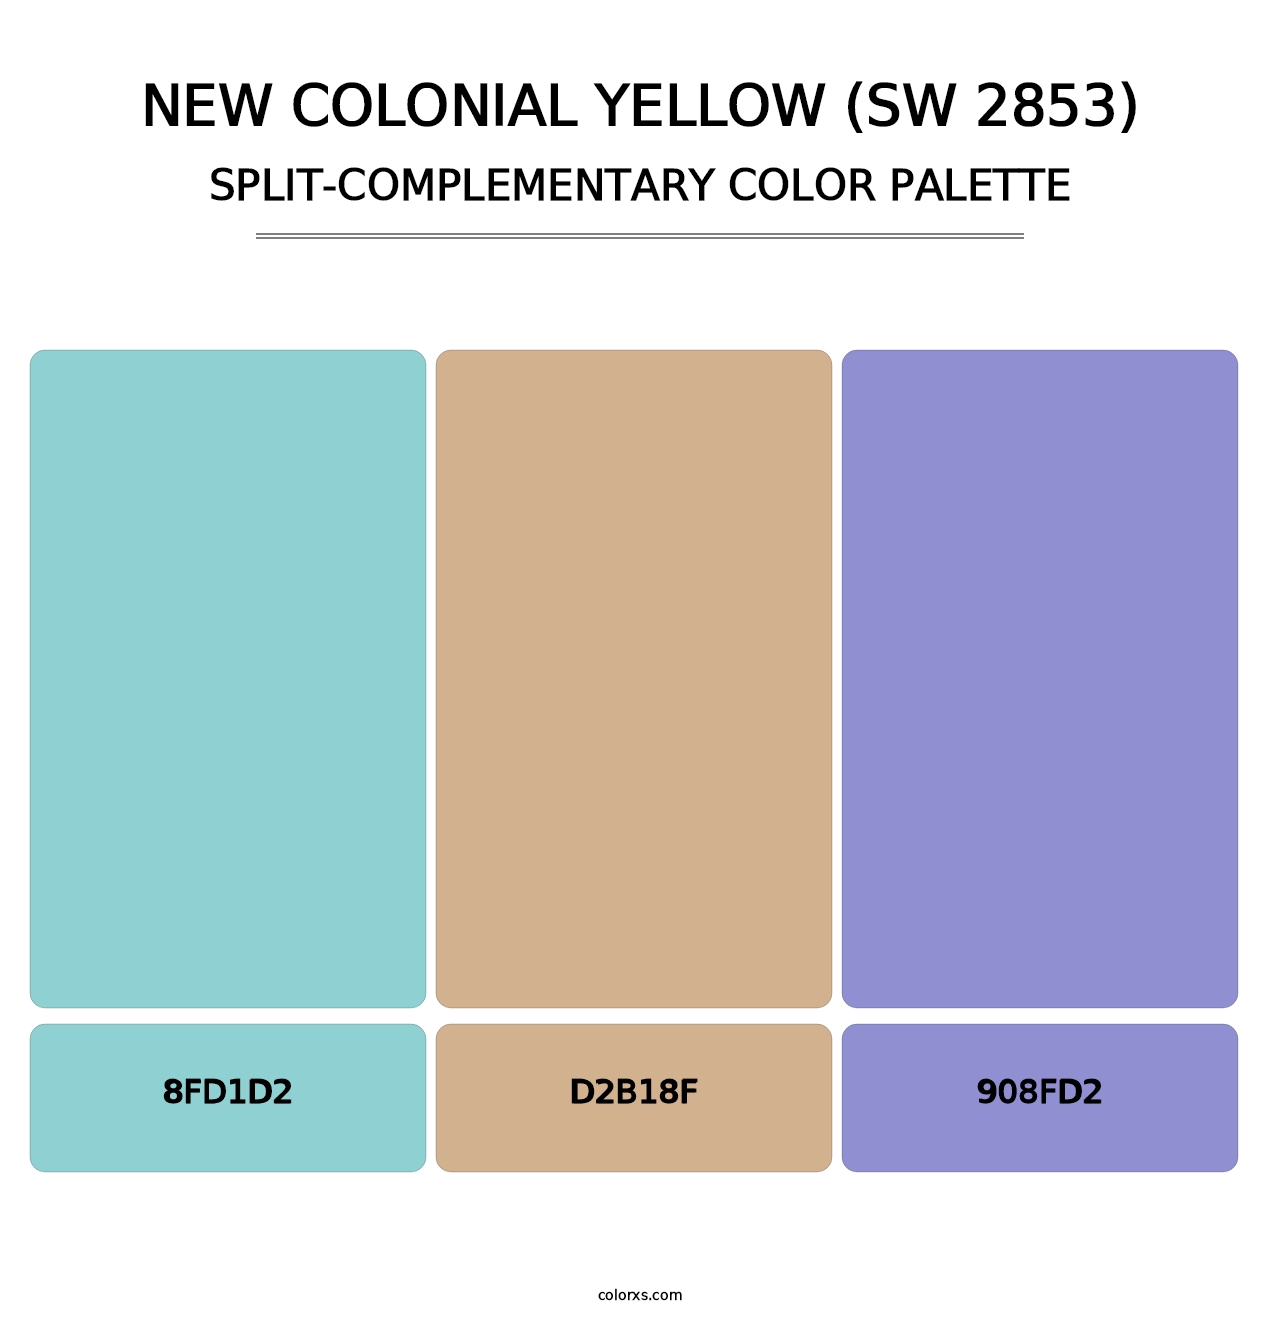 New Colonial Yellow (SW 2853) - Split-Complementary Color Palette